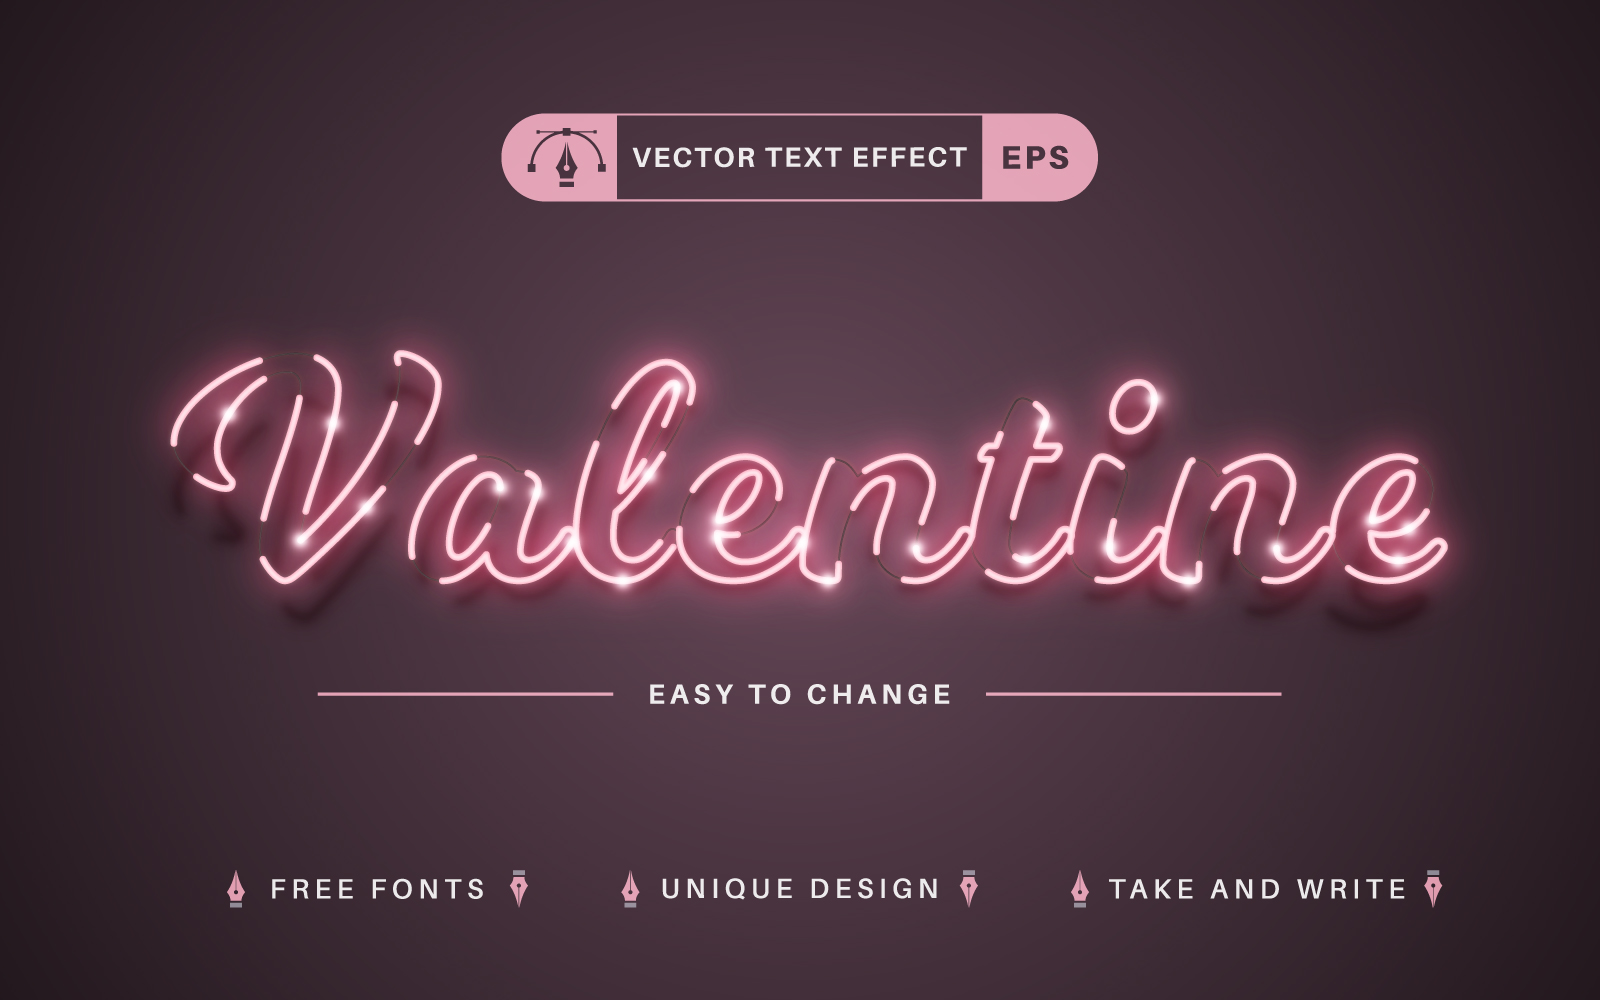 Valentine - Editable Text Effect, Font Style